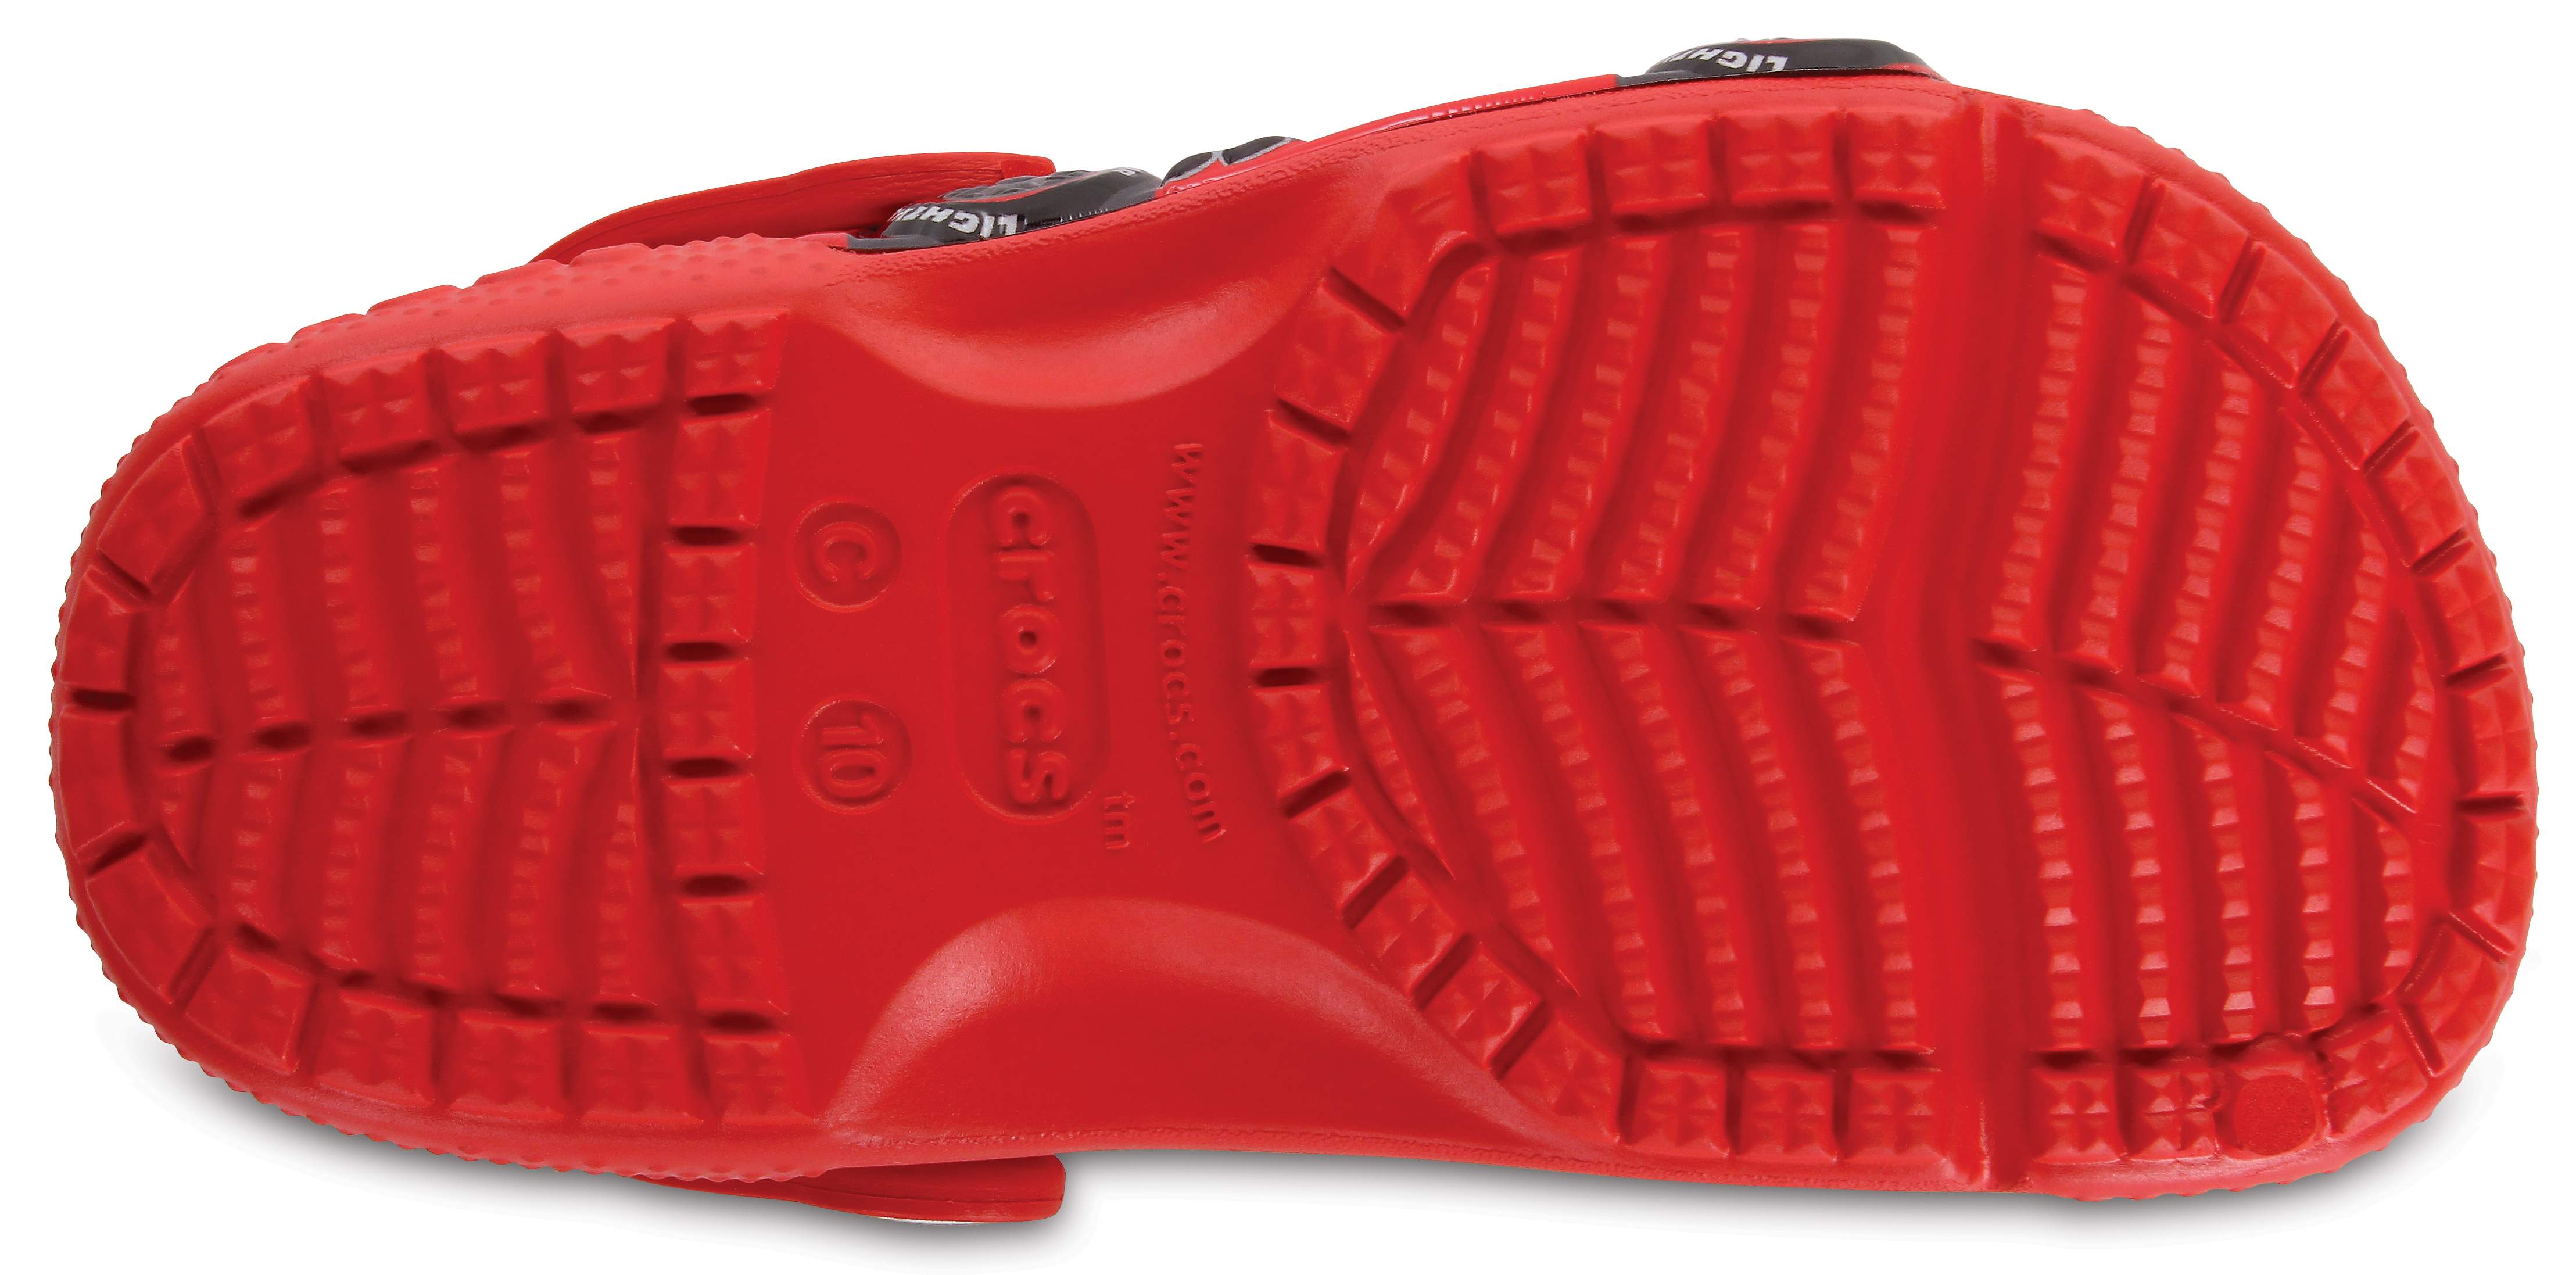 red and black crocs